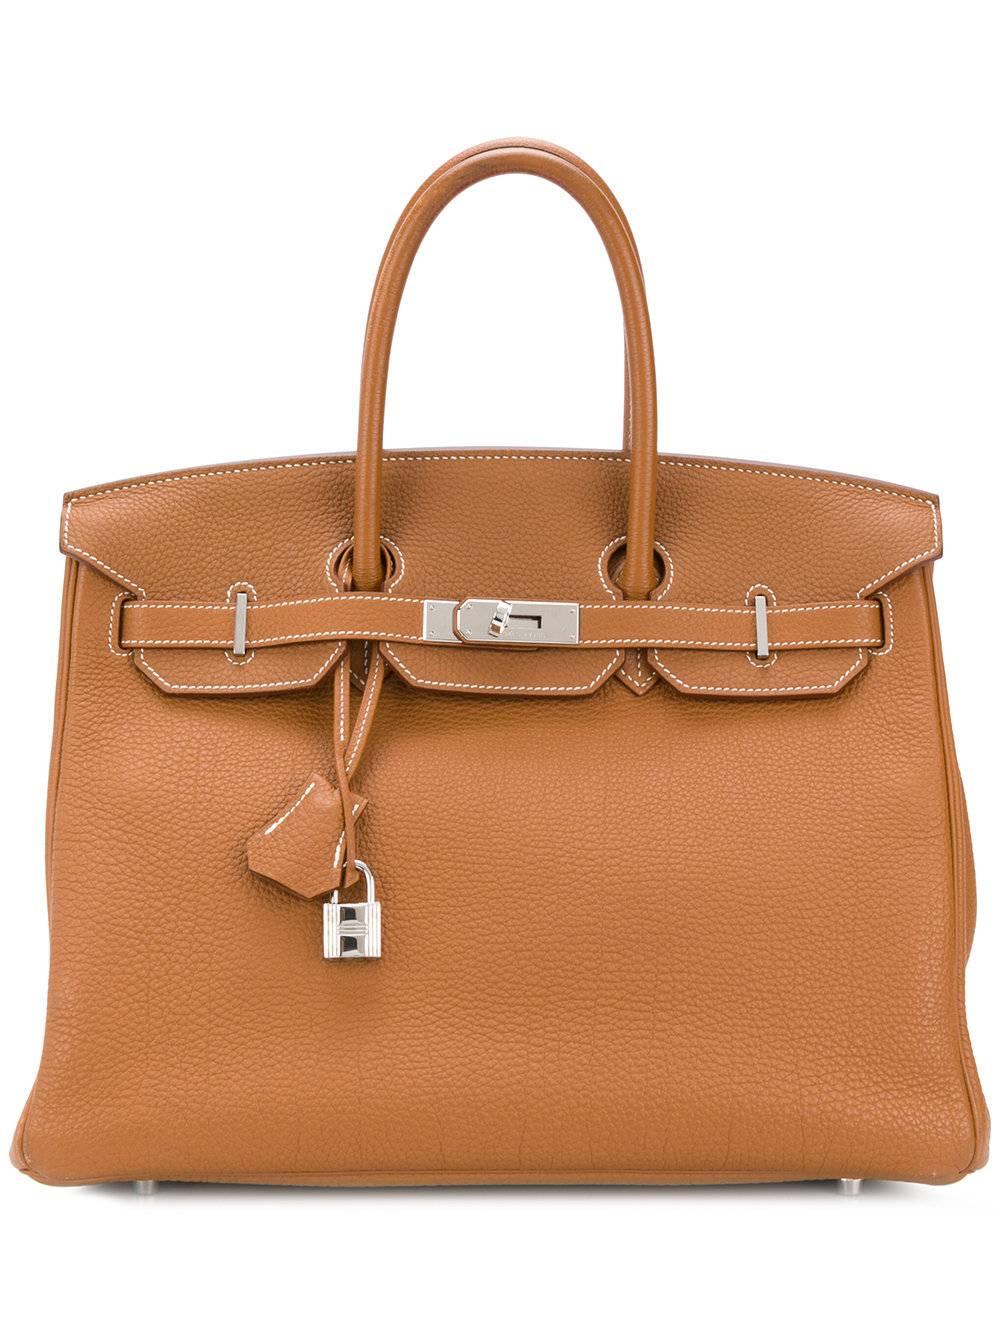 This Hermès Birkin 35cm is crafted from gold togo leather, a highly popular hide due to its ability to retain its shape and near-scratch resistance. Its deep, The gold exterior is offset with silver-toned palladium hardware. 35cm in width, the